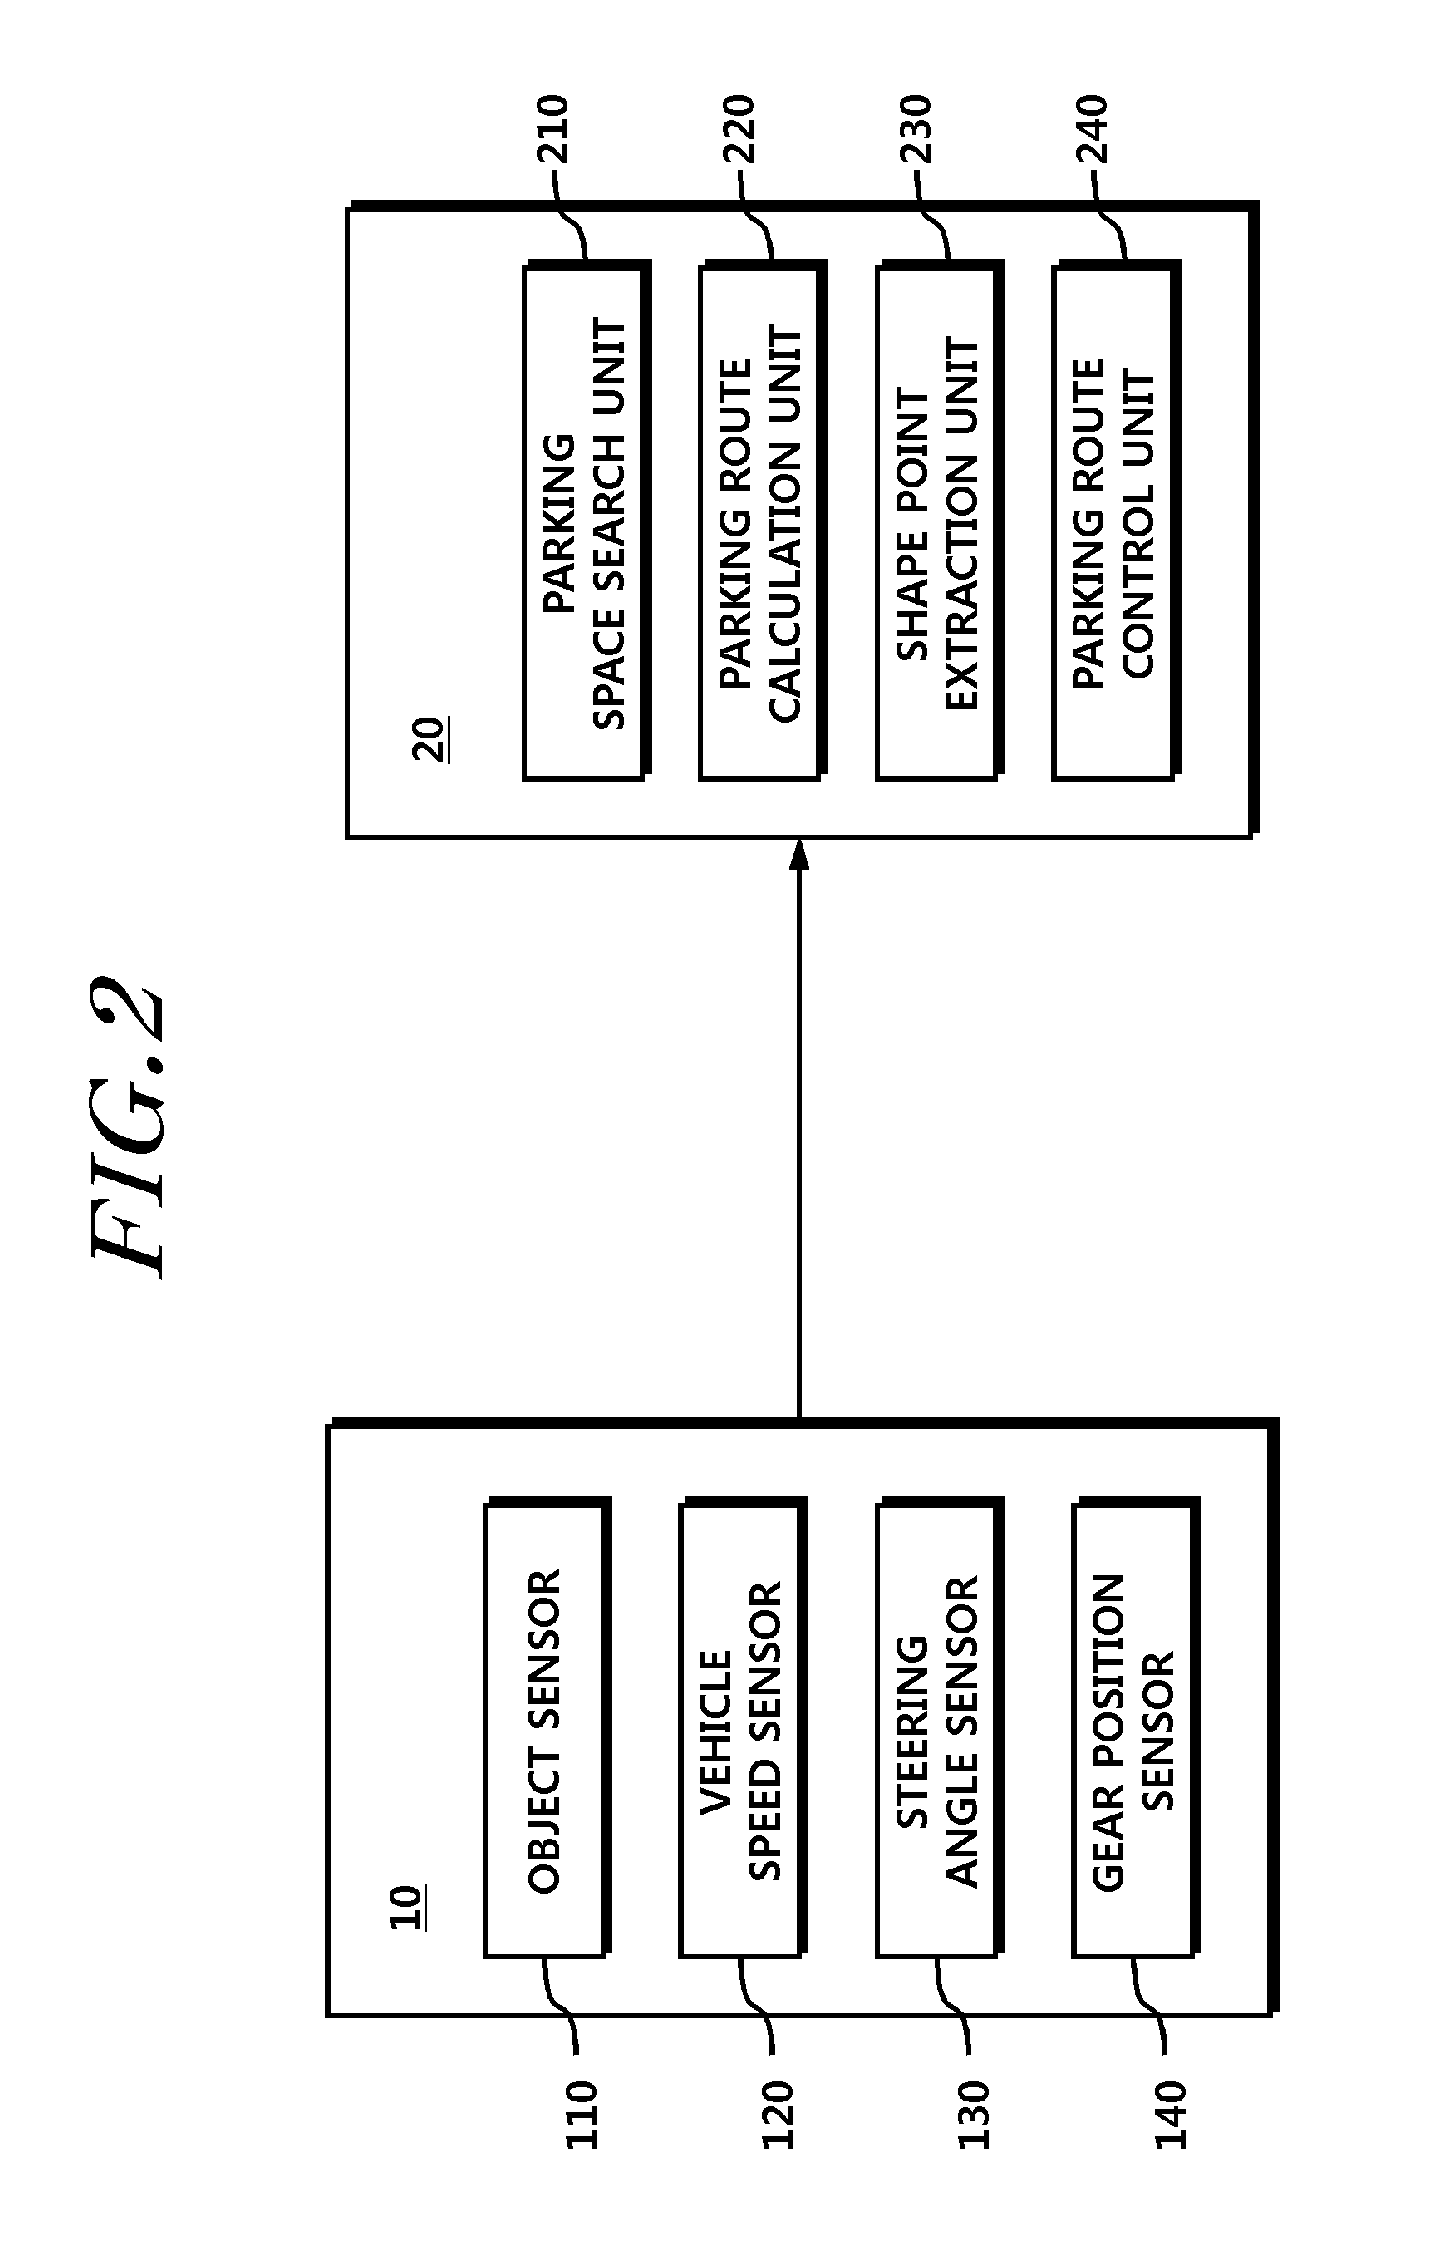 Parking control method, device and system